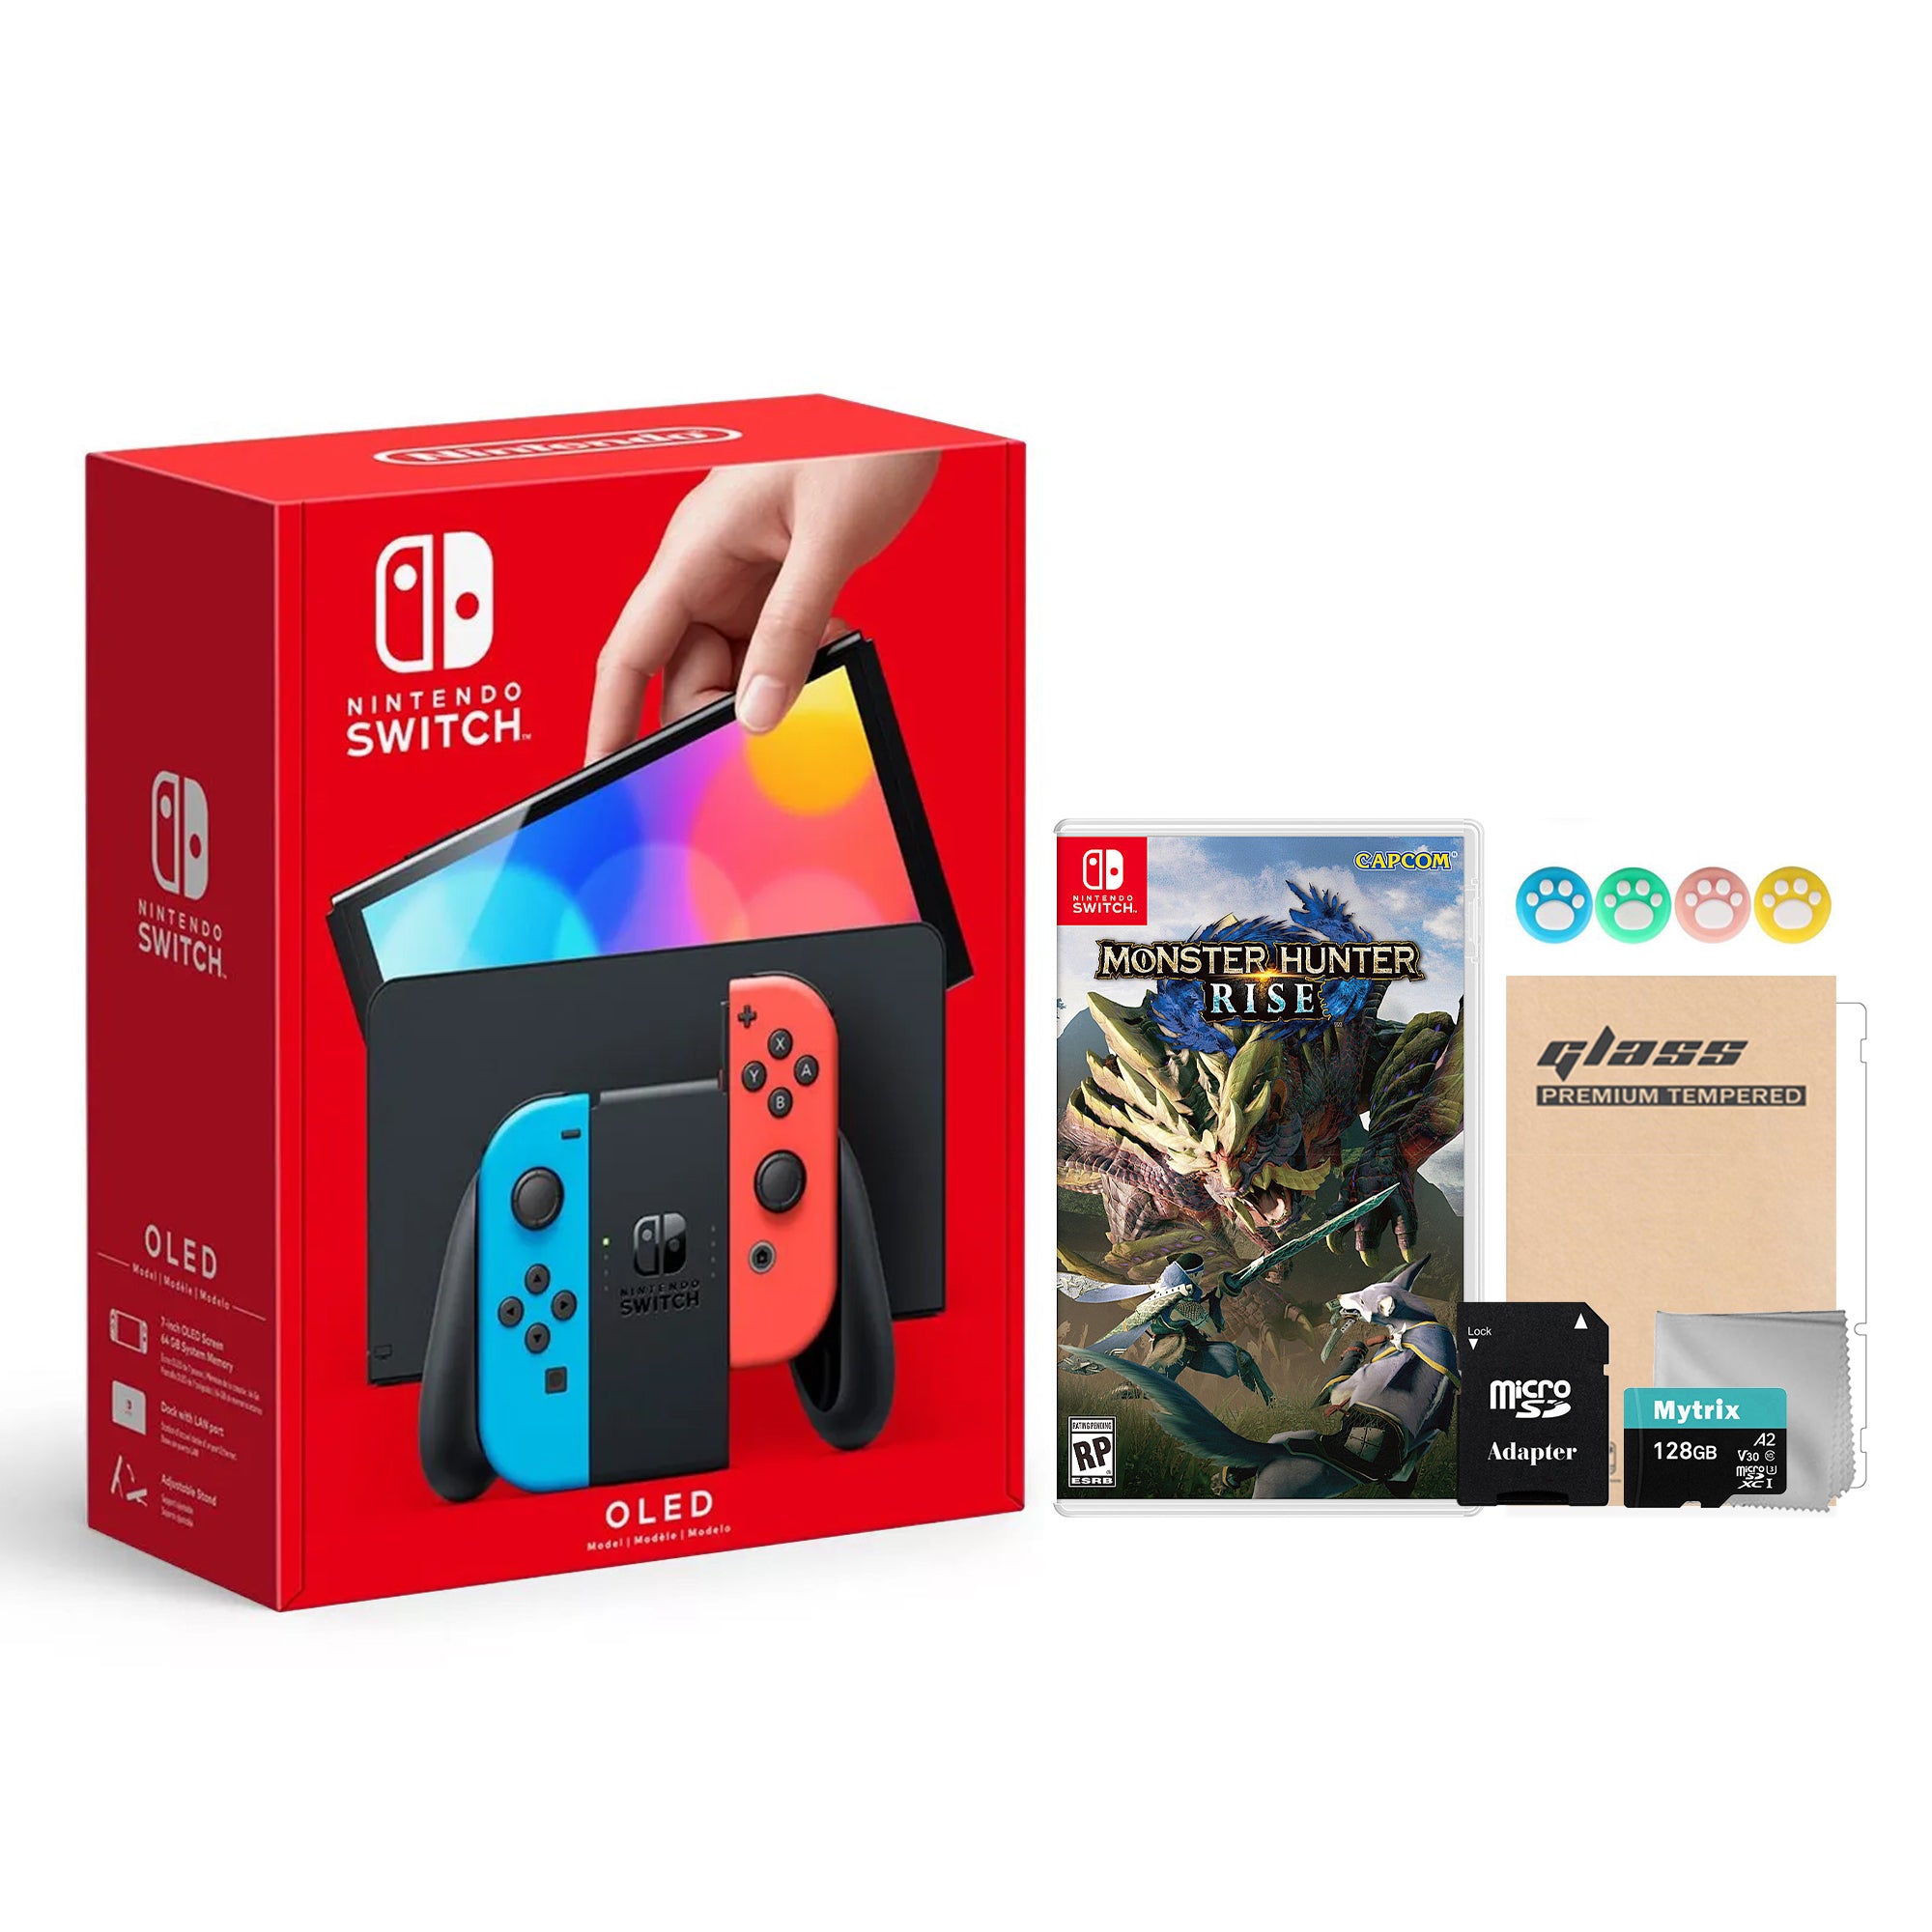 2021 New Nintendo Switch OLED Model Neon Red & Blue Joy Con 64GB Console HD Screen and LAN-Port Dock with Monster Hunter: Rise And Mytrix Accessories